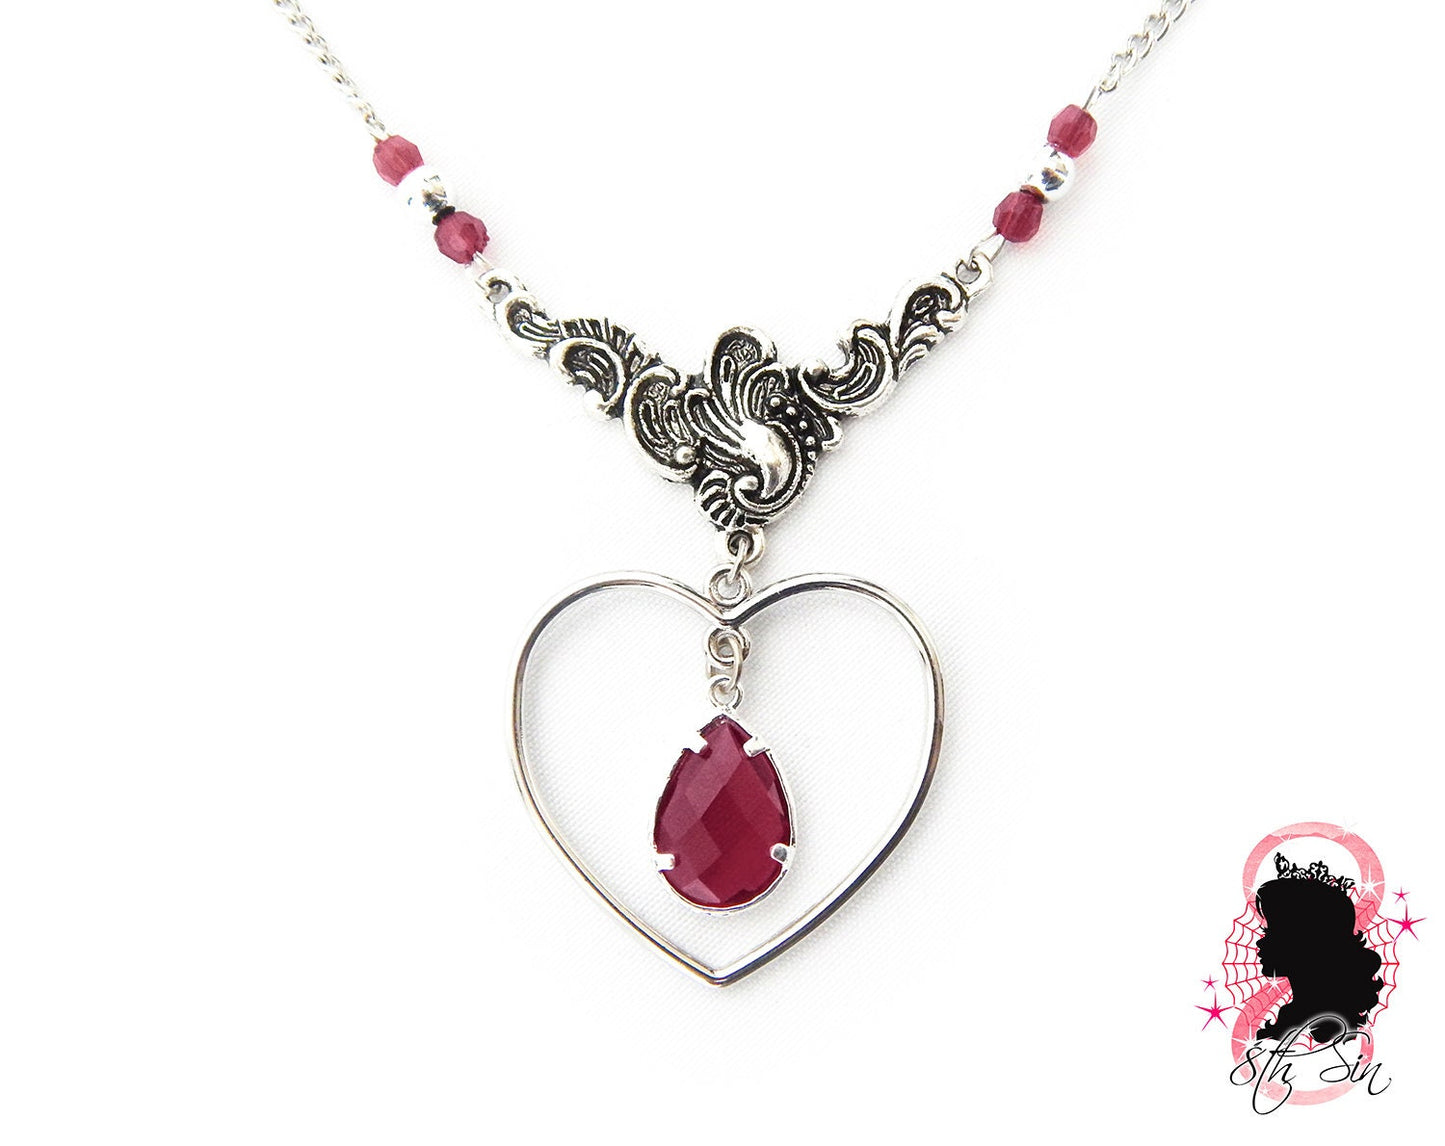 Antique Silver and Amethyst Heart Necklace